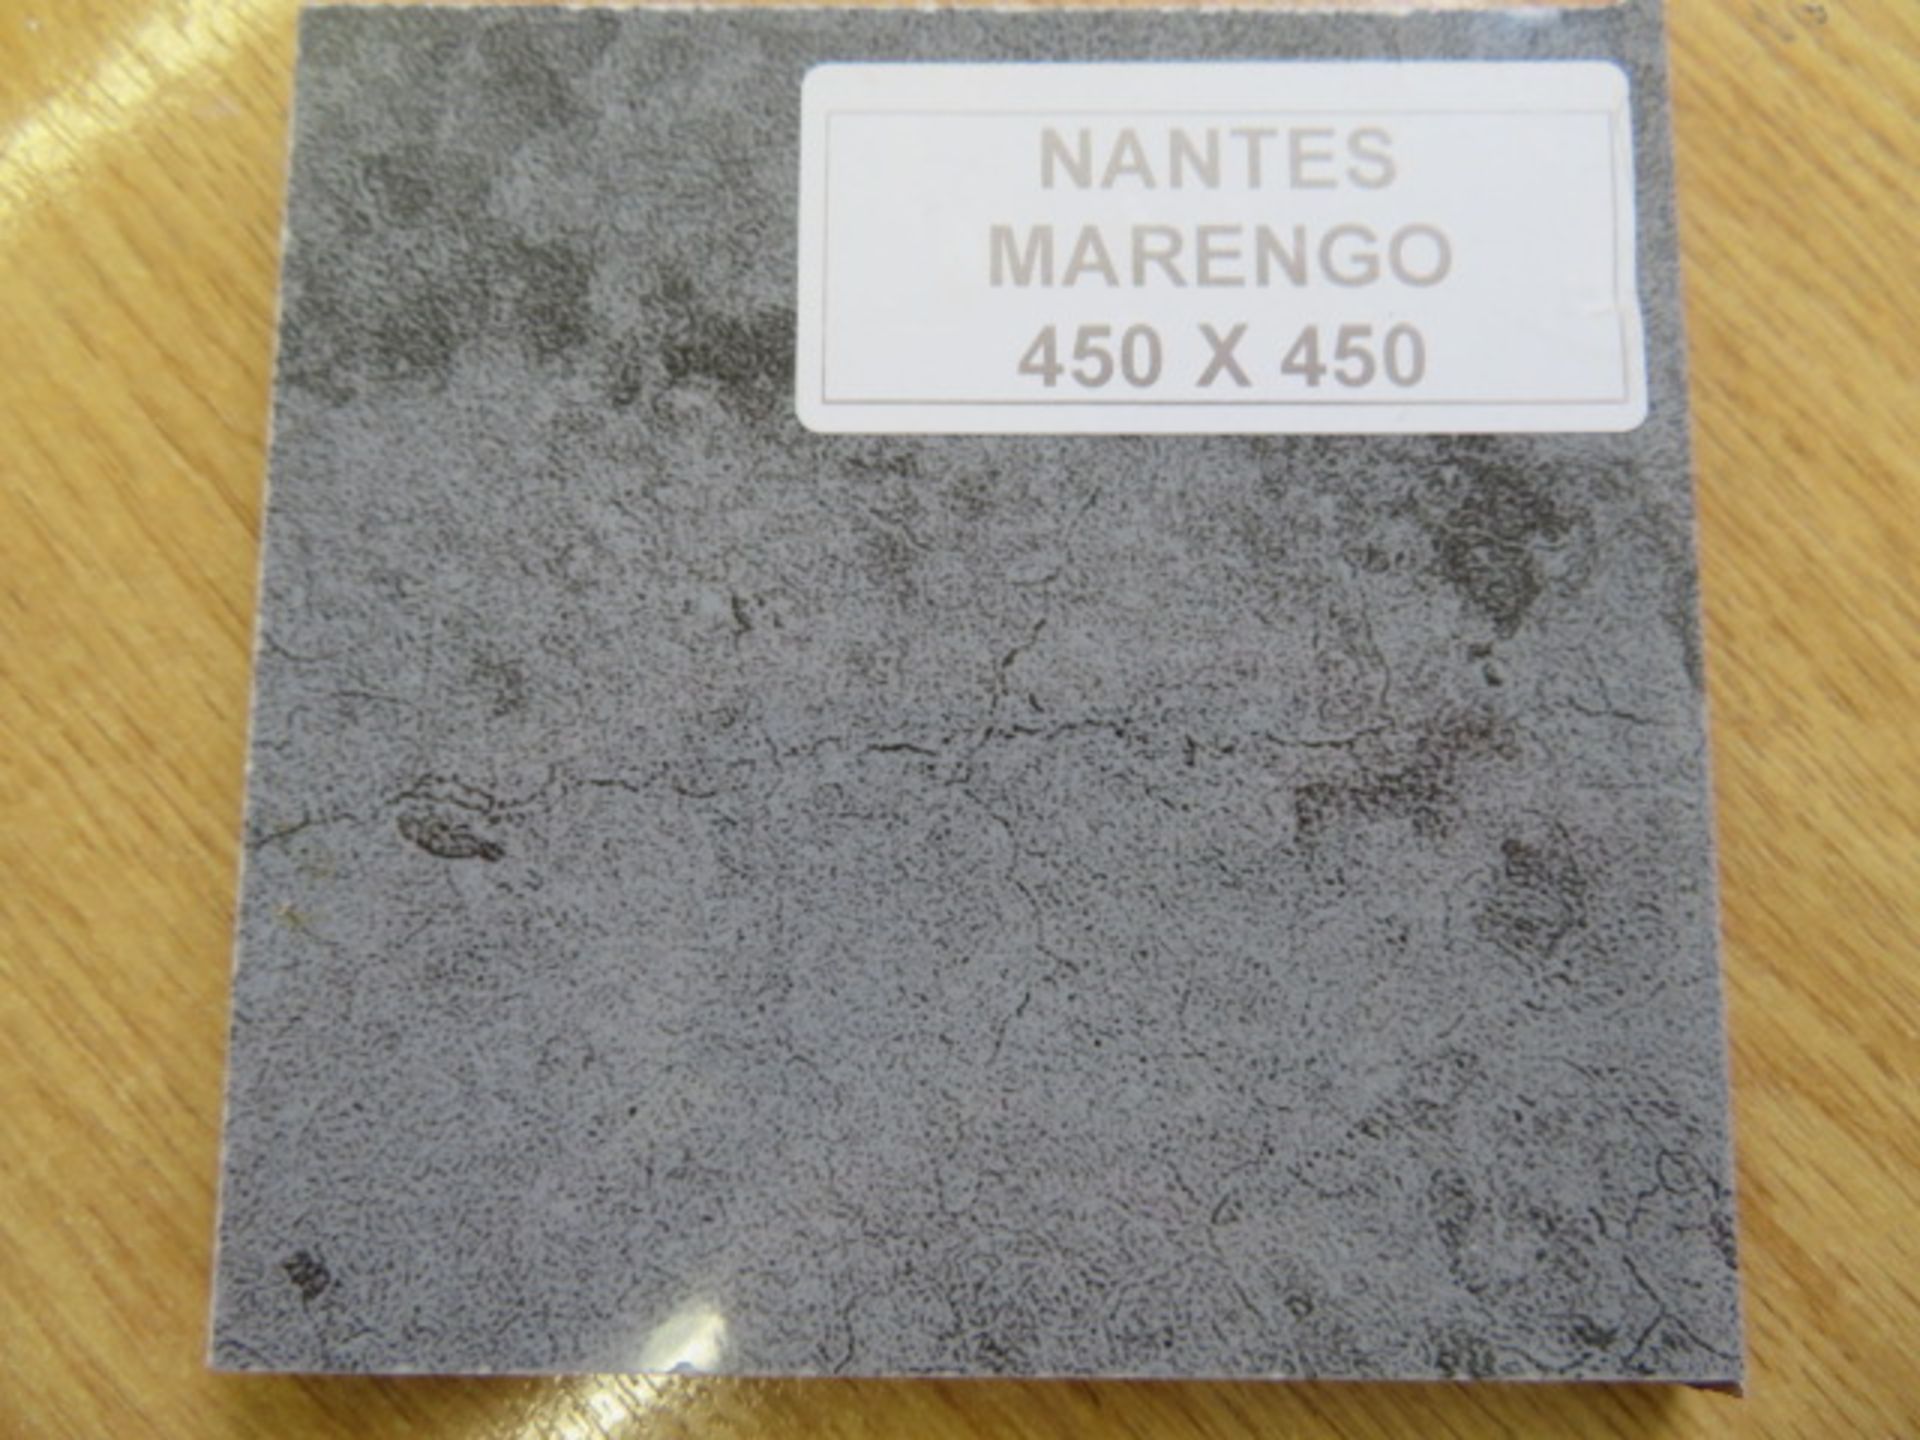 NEW 7.1 Square Meters of Nantes Marengo Wall and Floor Tiles. 450x450mm per tile, 8mm thick. ... - Image 3 of 3